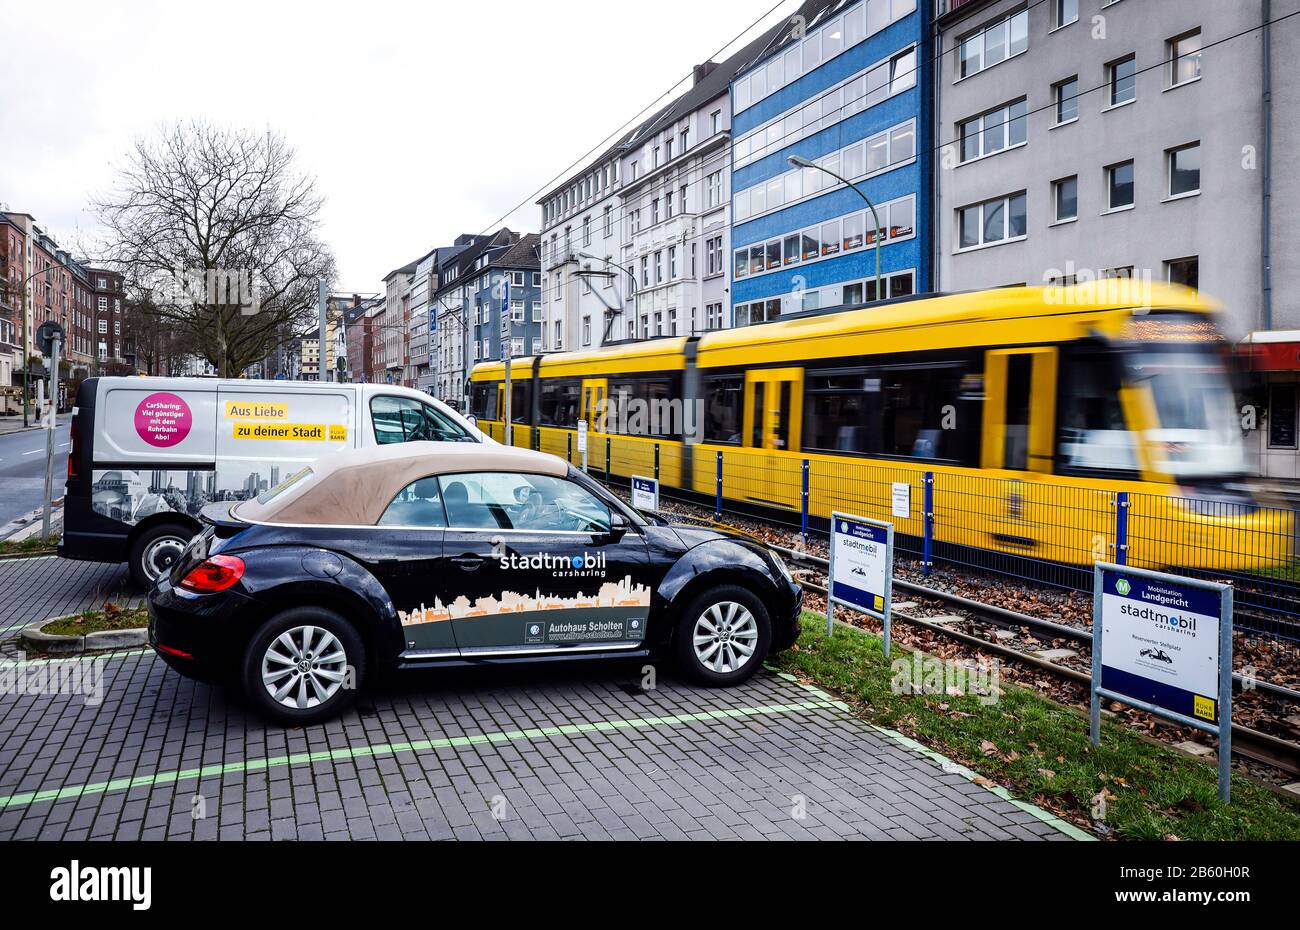 Essen, Ruhr area, North Rhine-Westphalia, Germany - A carsharing stadtmobil stands at the mobile station Landgericht, in the back a tram. Essen, Ruhrg Stock Photo